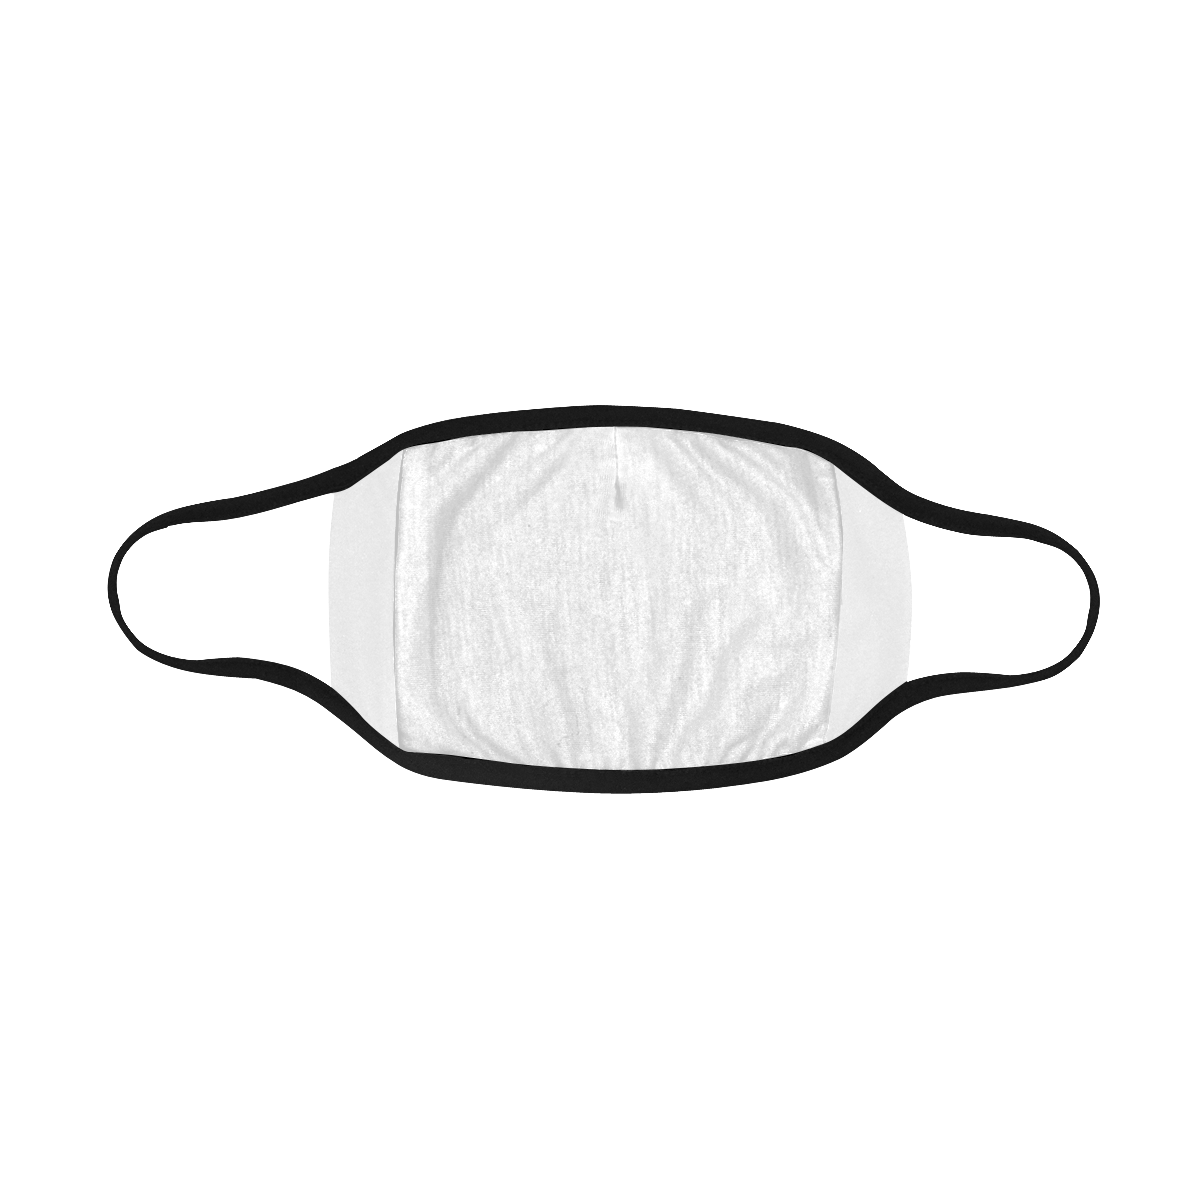 Mouth Mask (15 Filters Included) (Non-medical Products)